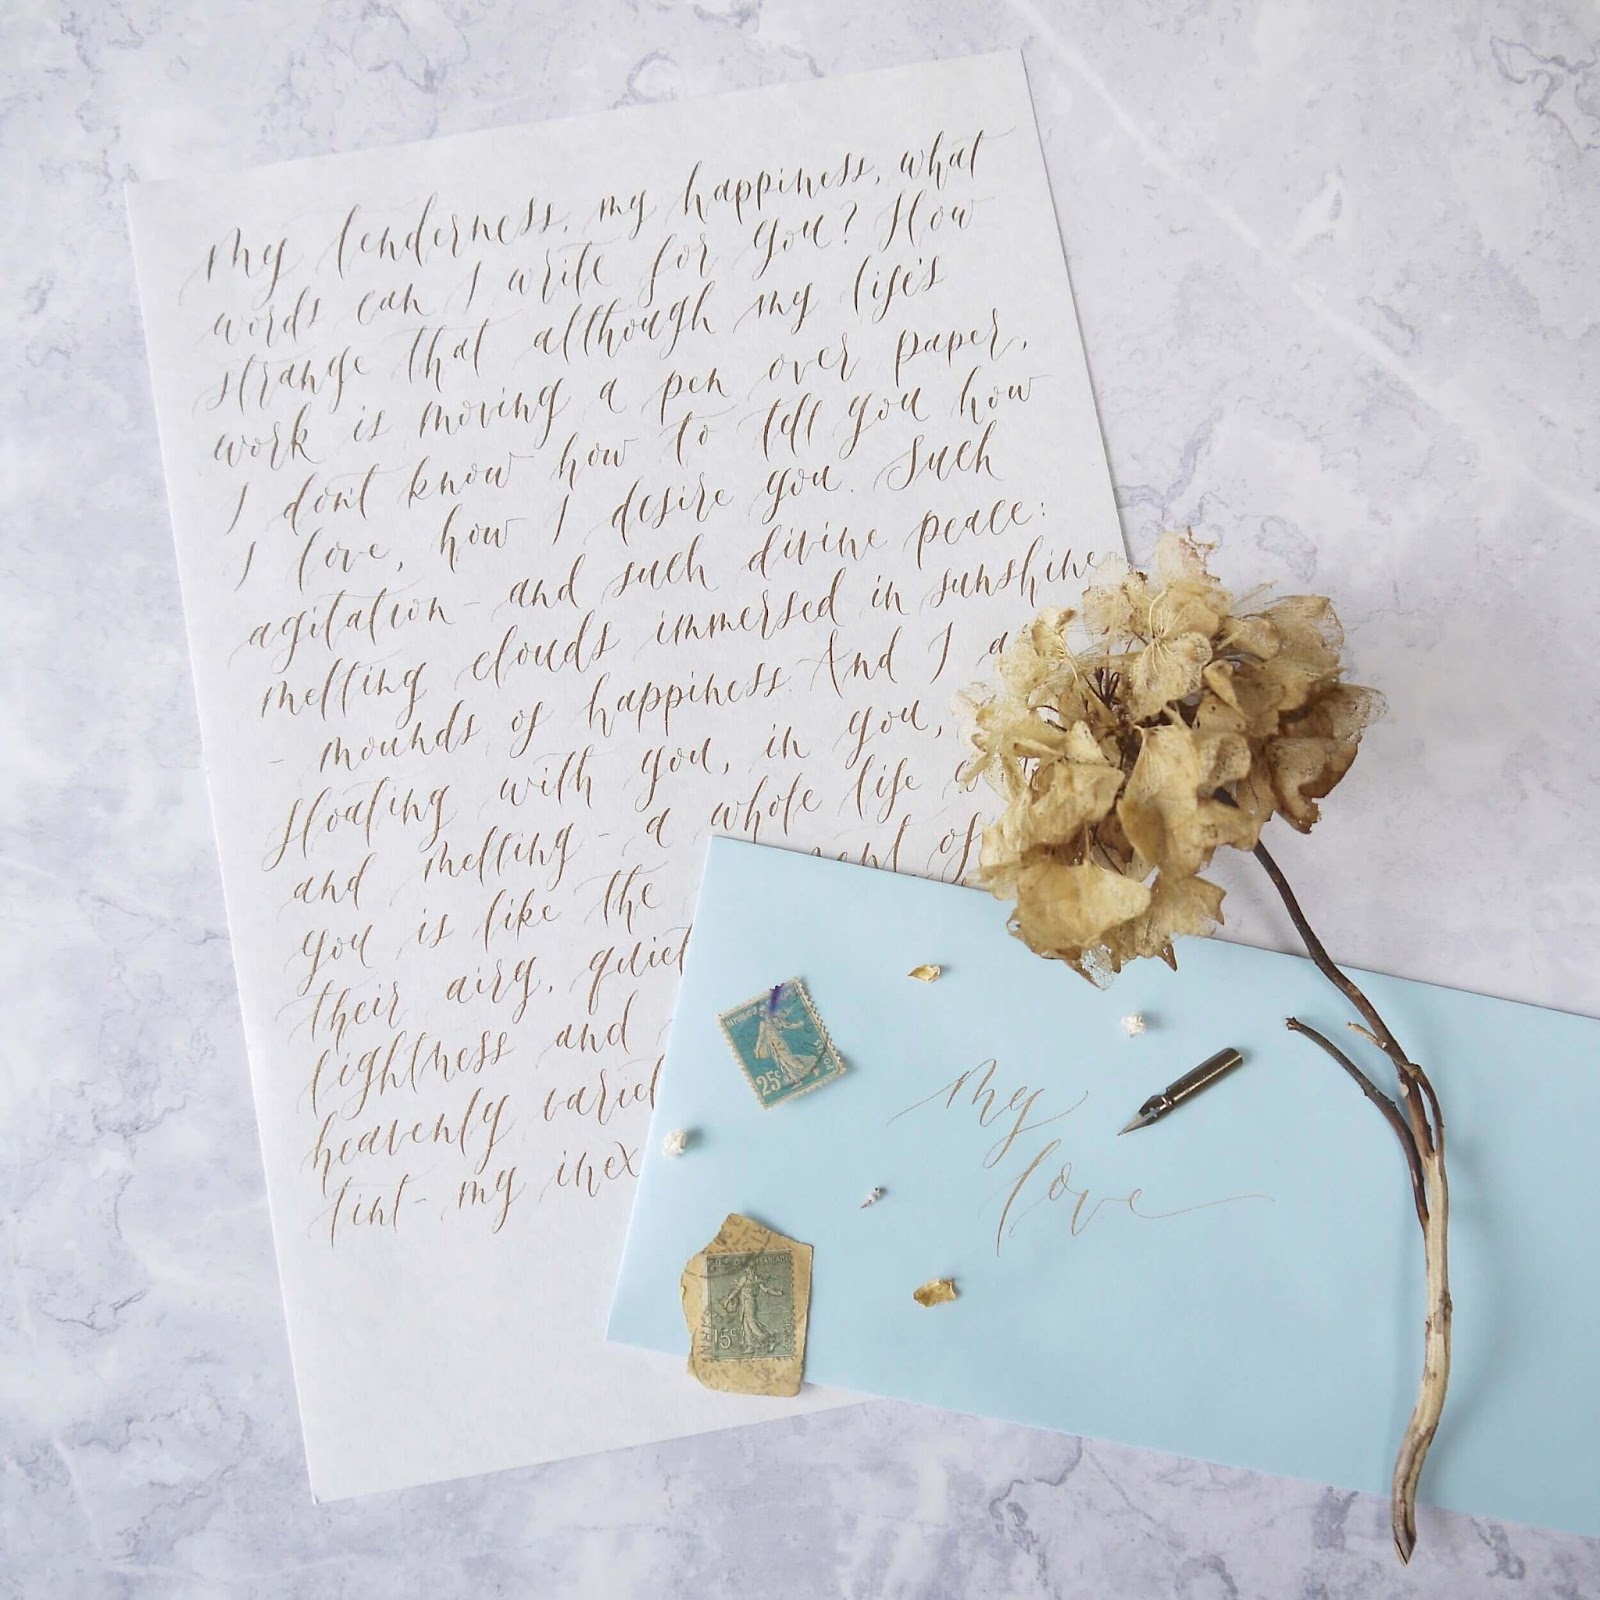 Cute Sentimental Gifts Ideas For Him